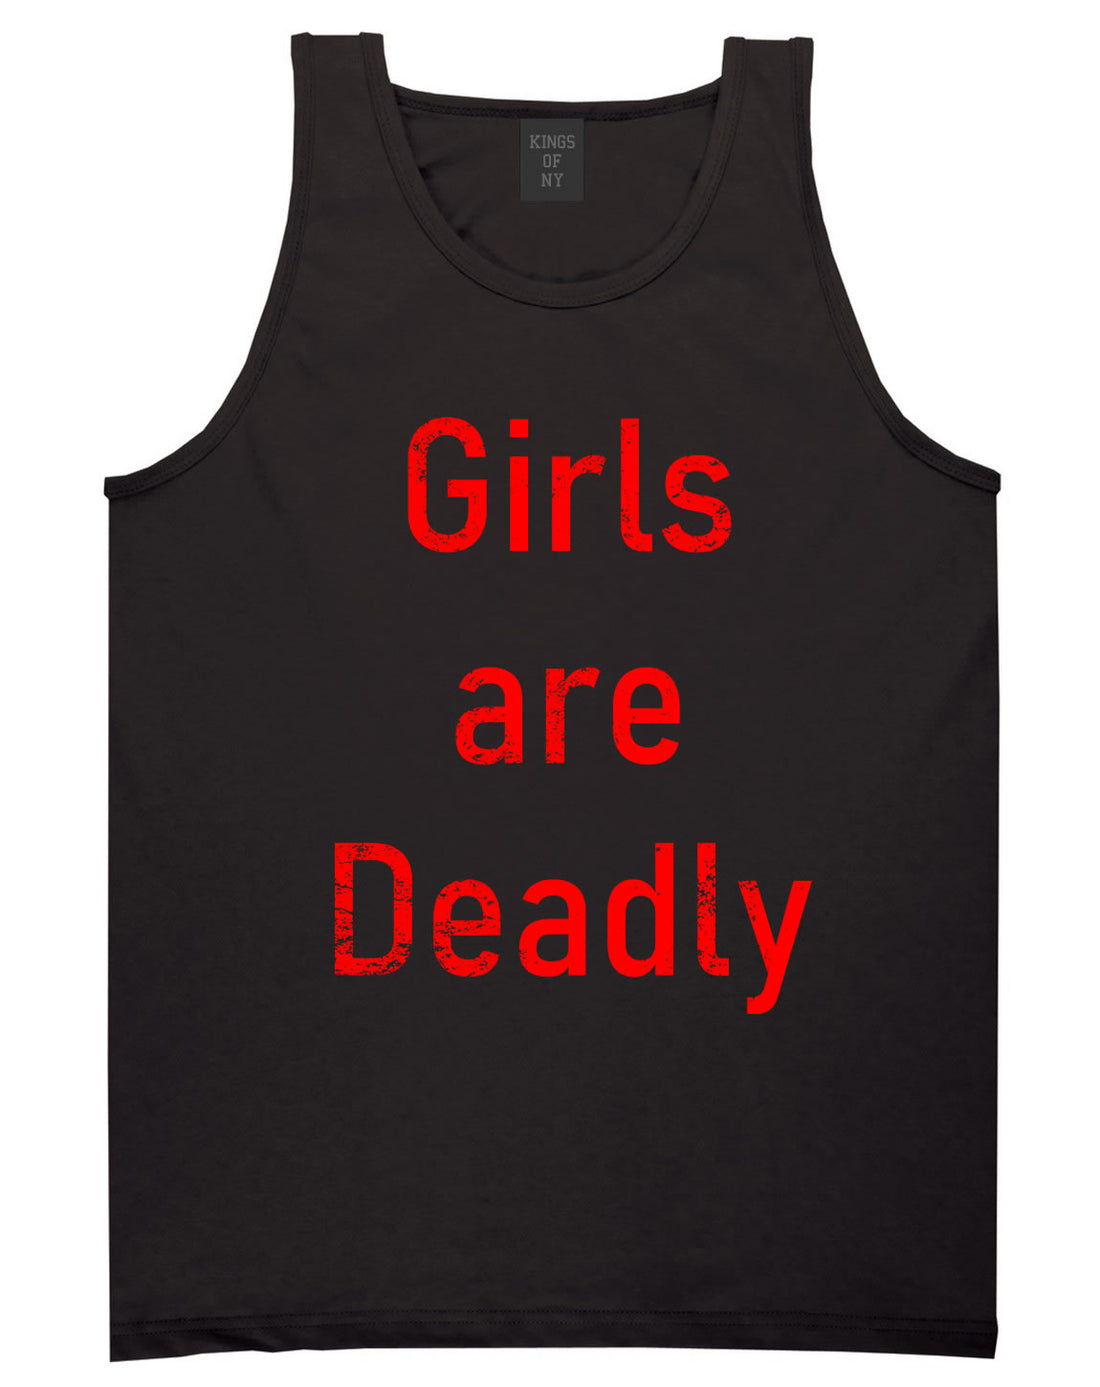 Girls Are Deadly Mens Tank Top Shirt Black By Kings Of NY